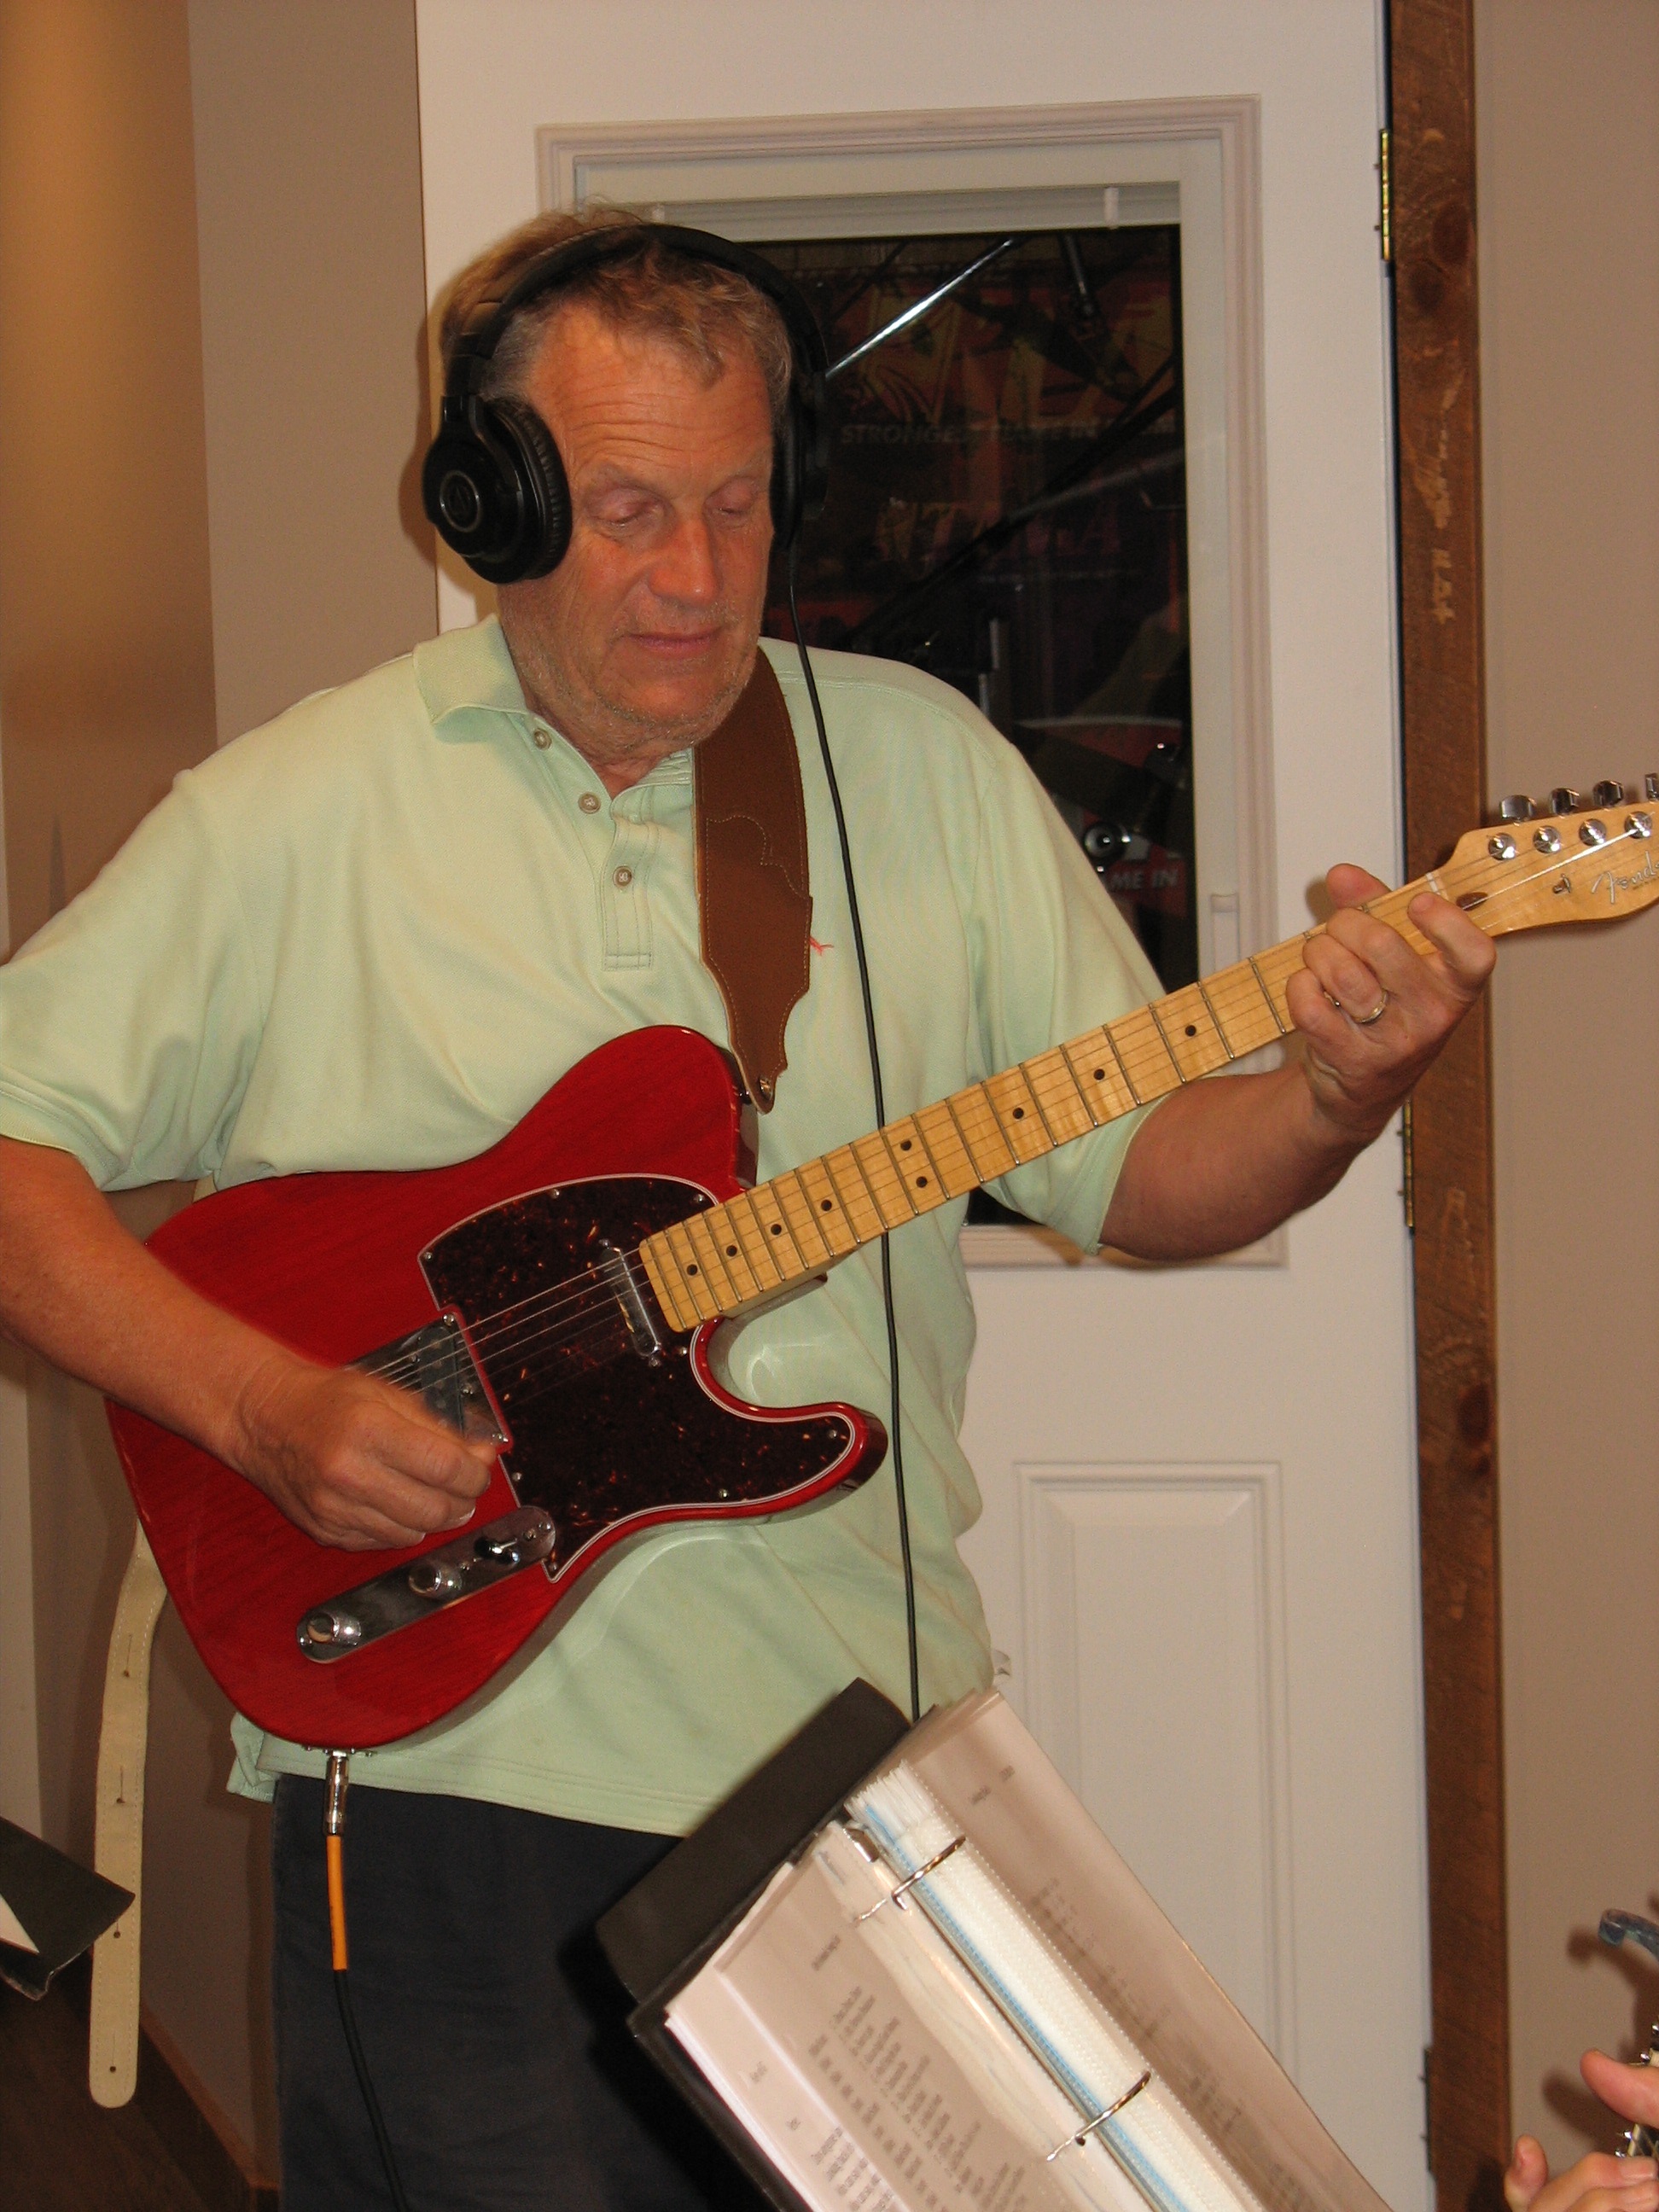 Client playing electric guitar